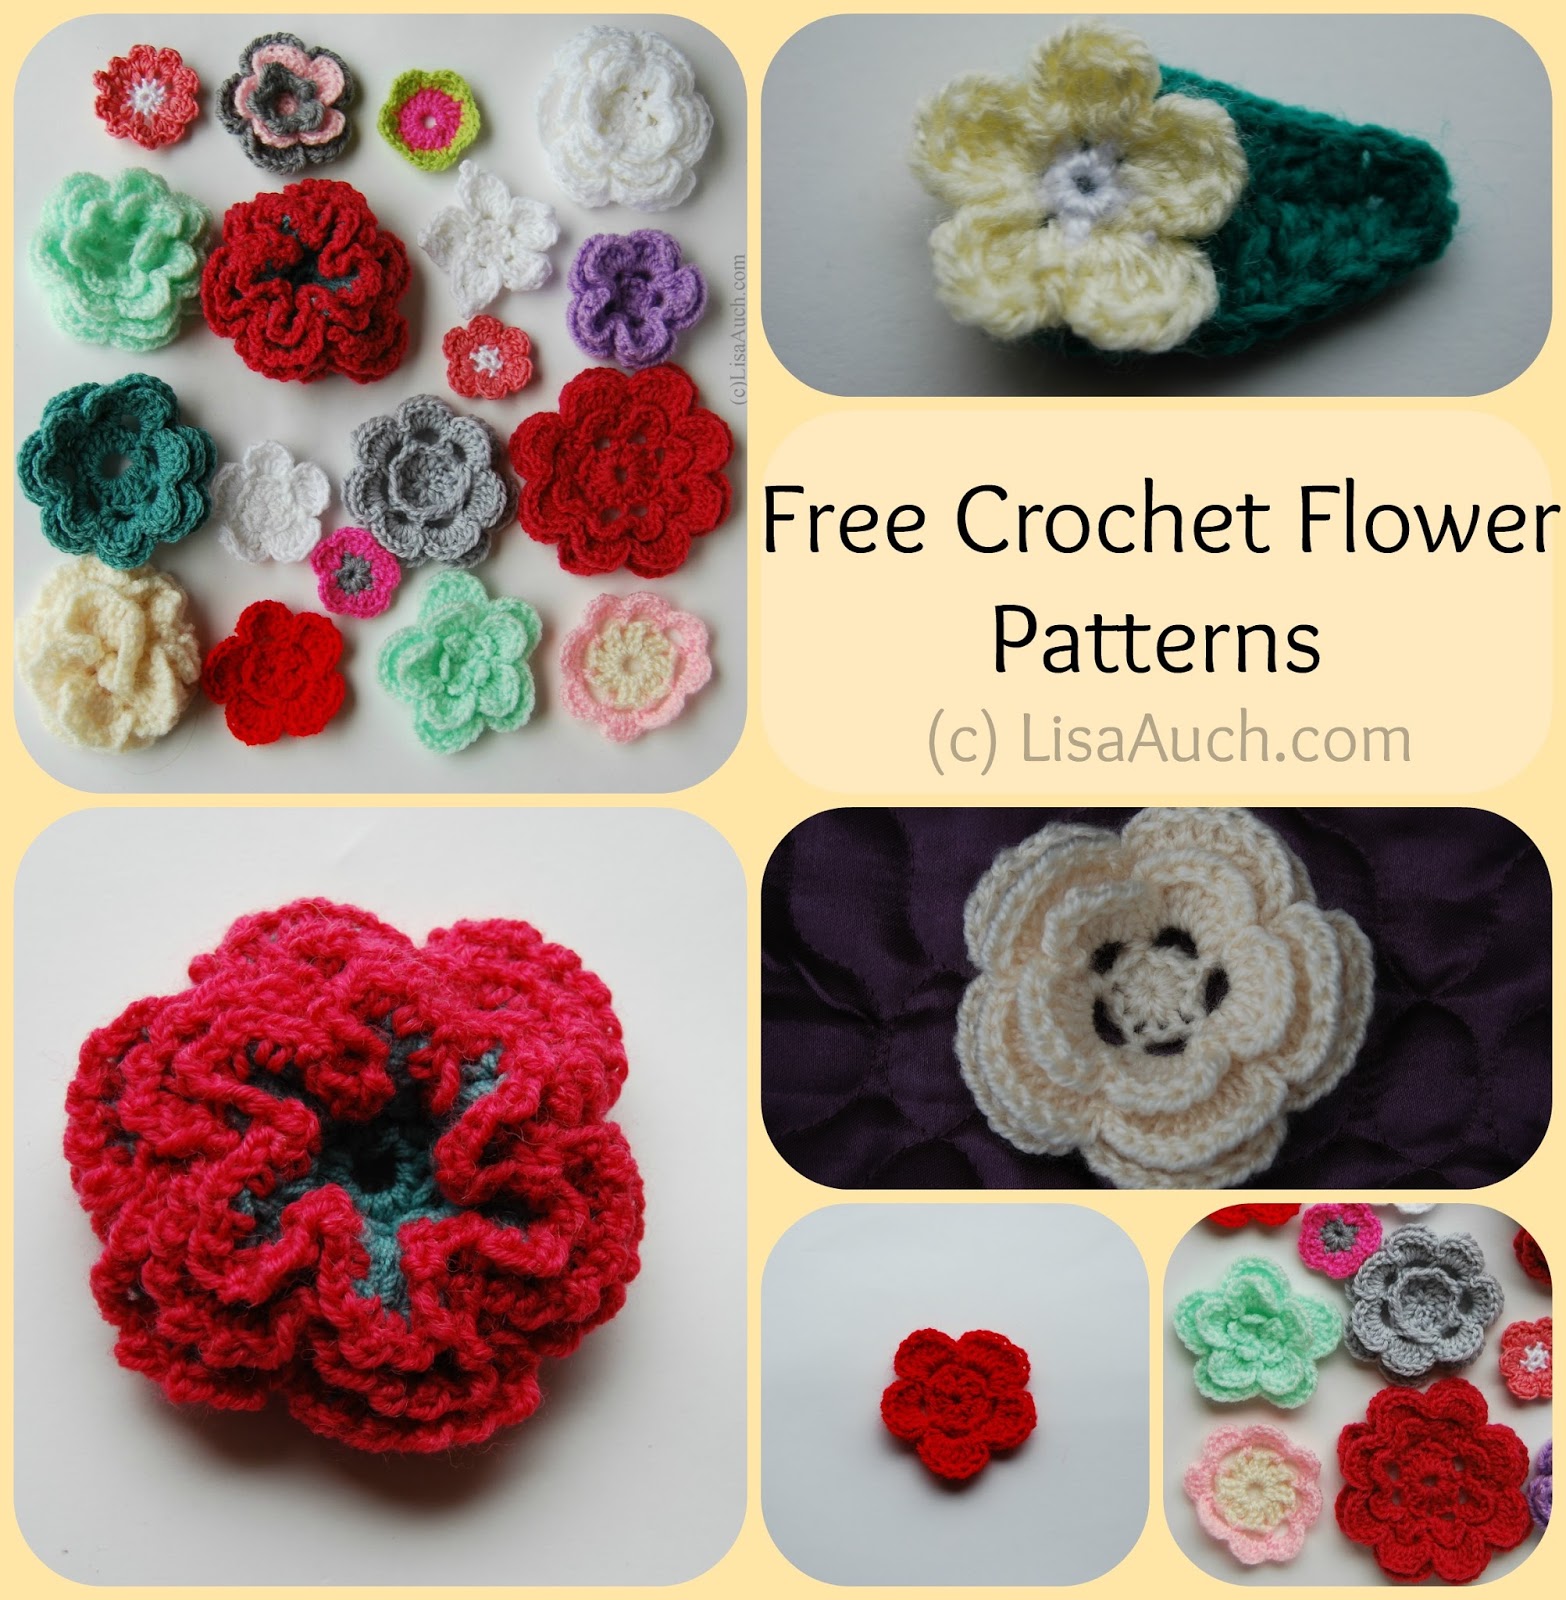 Free Crochet Flower Pattern How To Crochet A Rose Free Crochet Patterns And Designs By LisaAuch